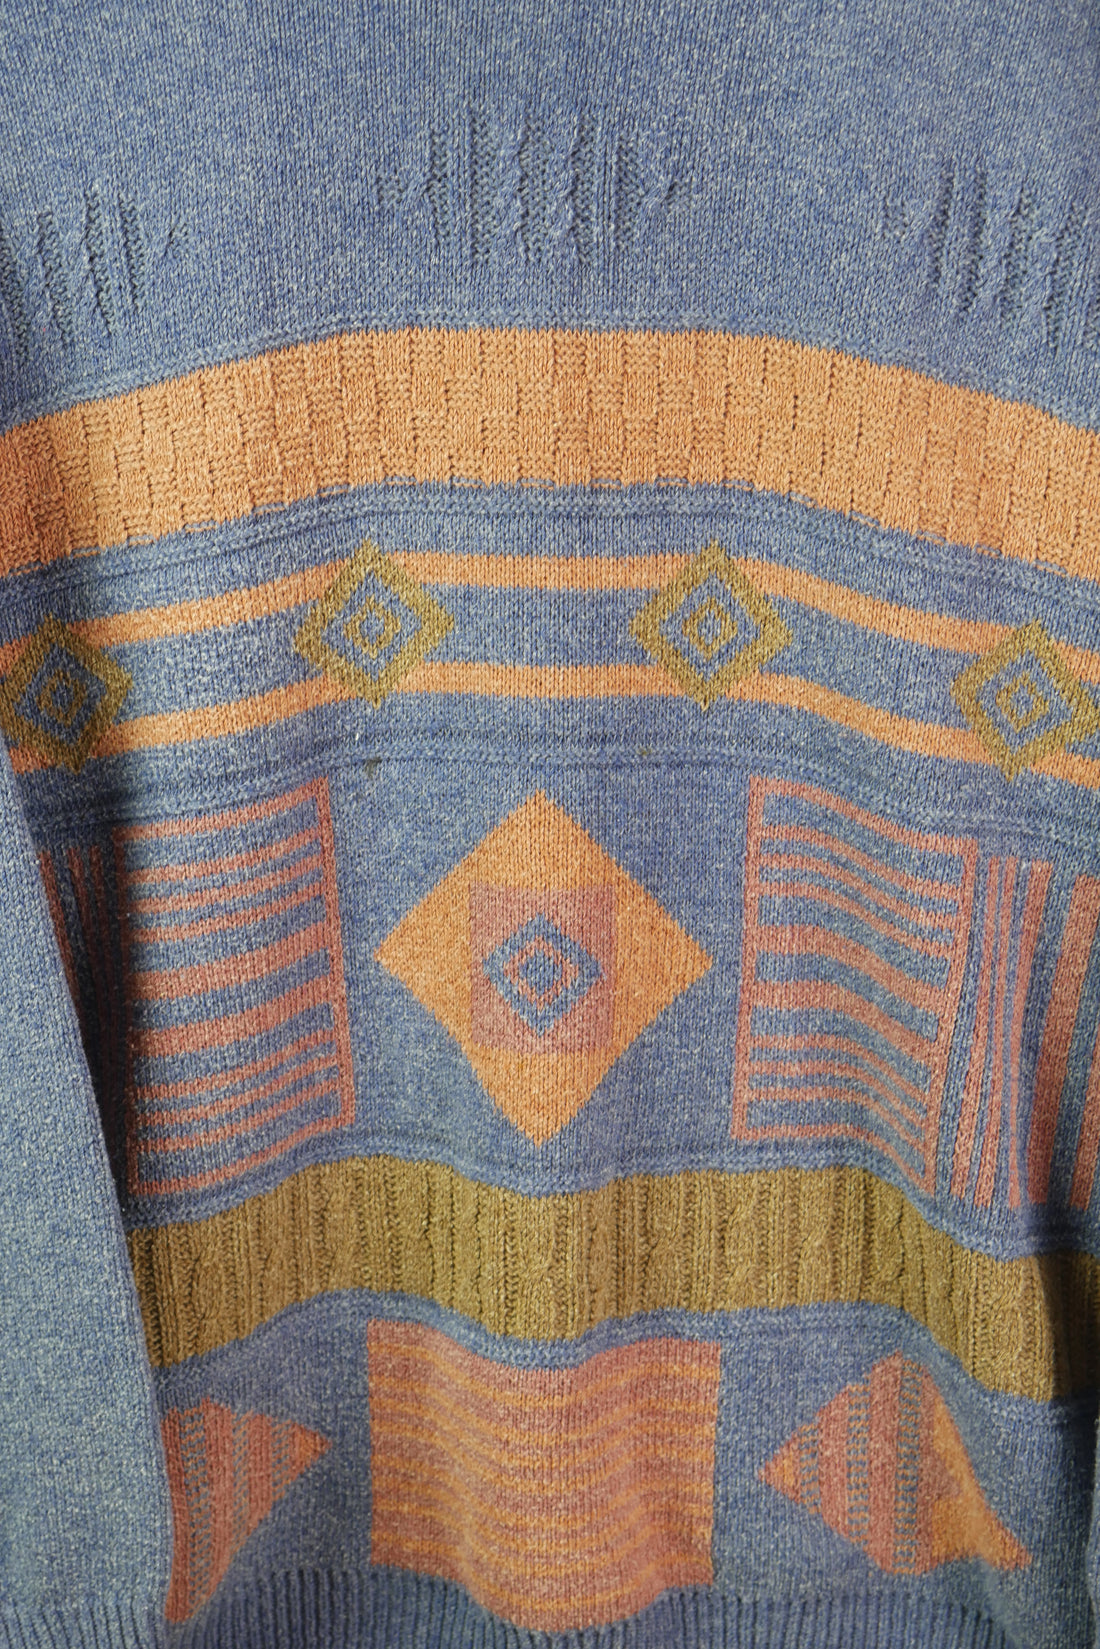 The Funky 80s Jumper (L)